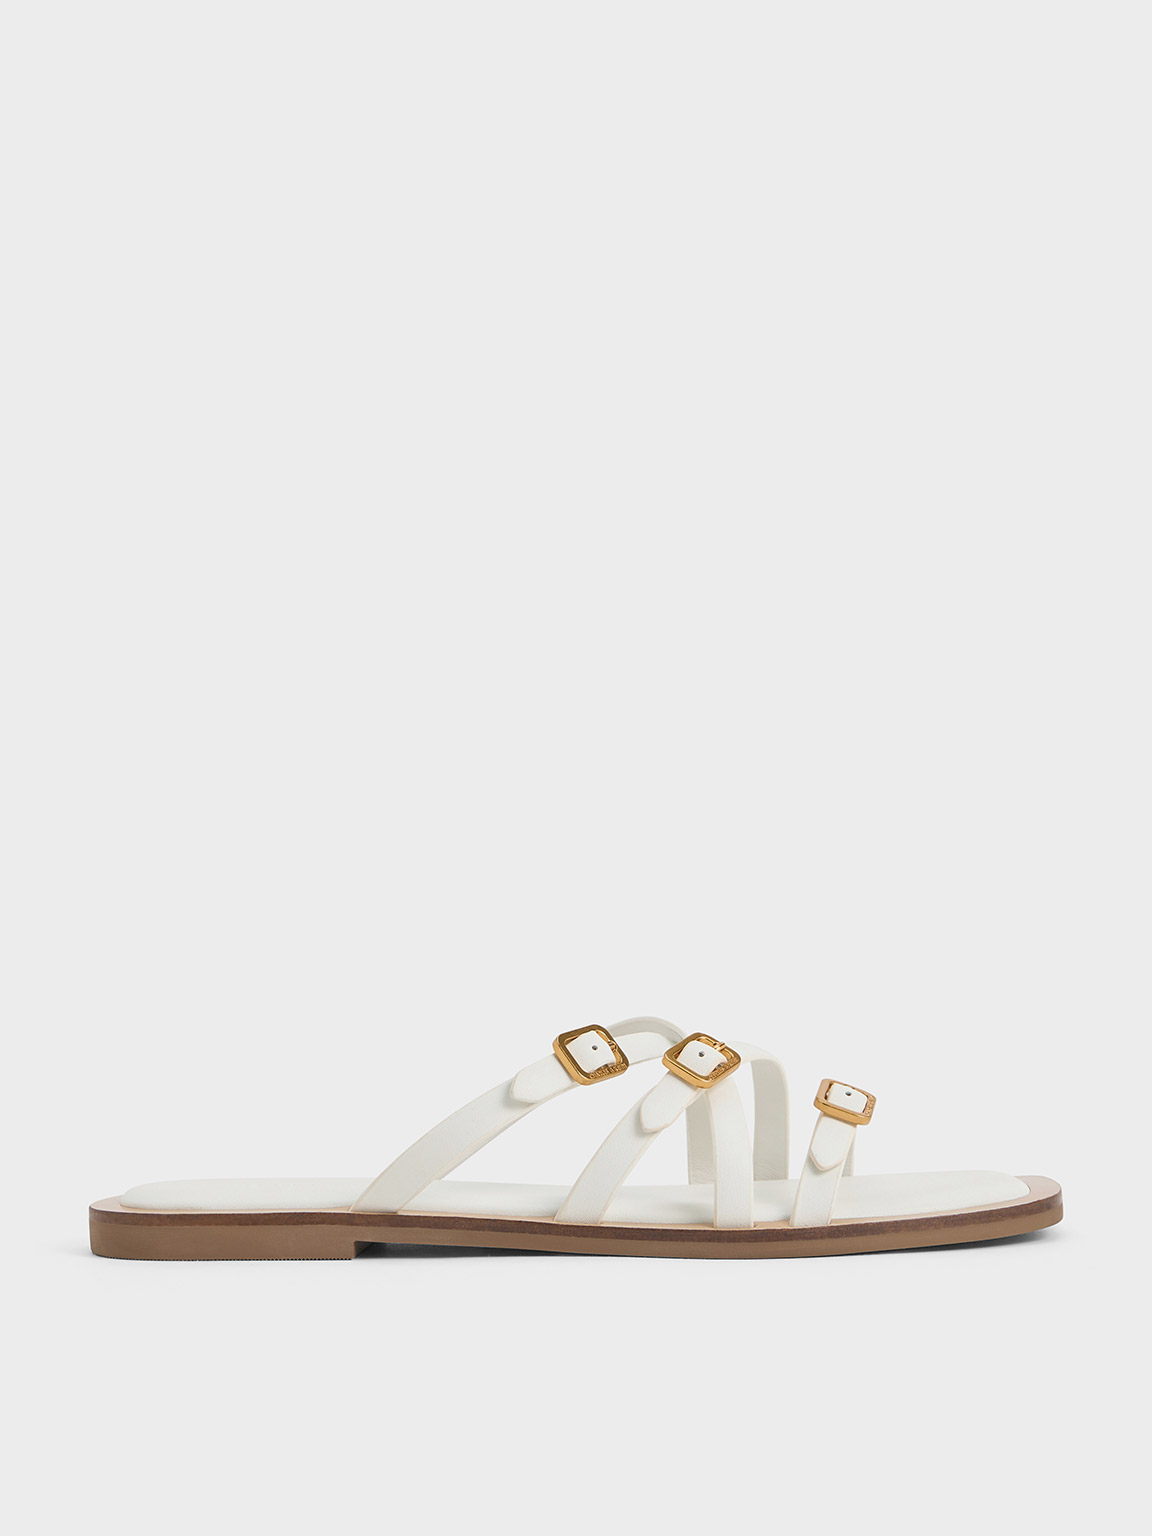 Charles & Keith Strappy Buckled Slide Sandals In White